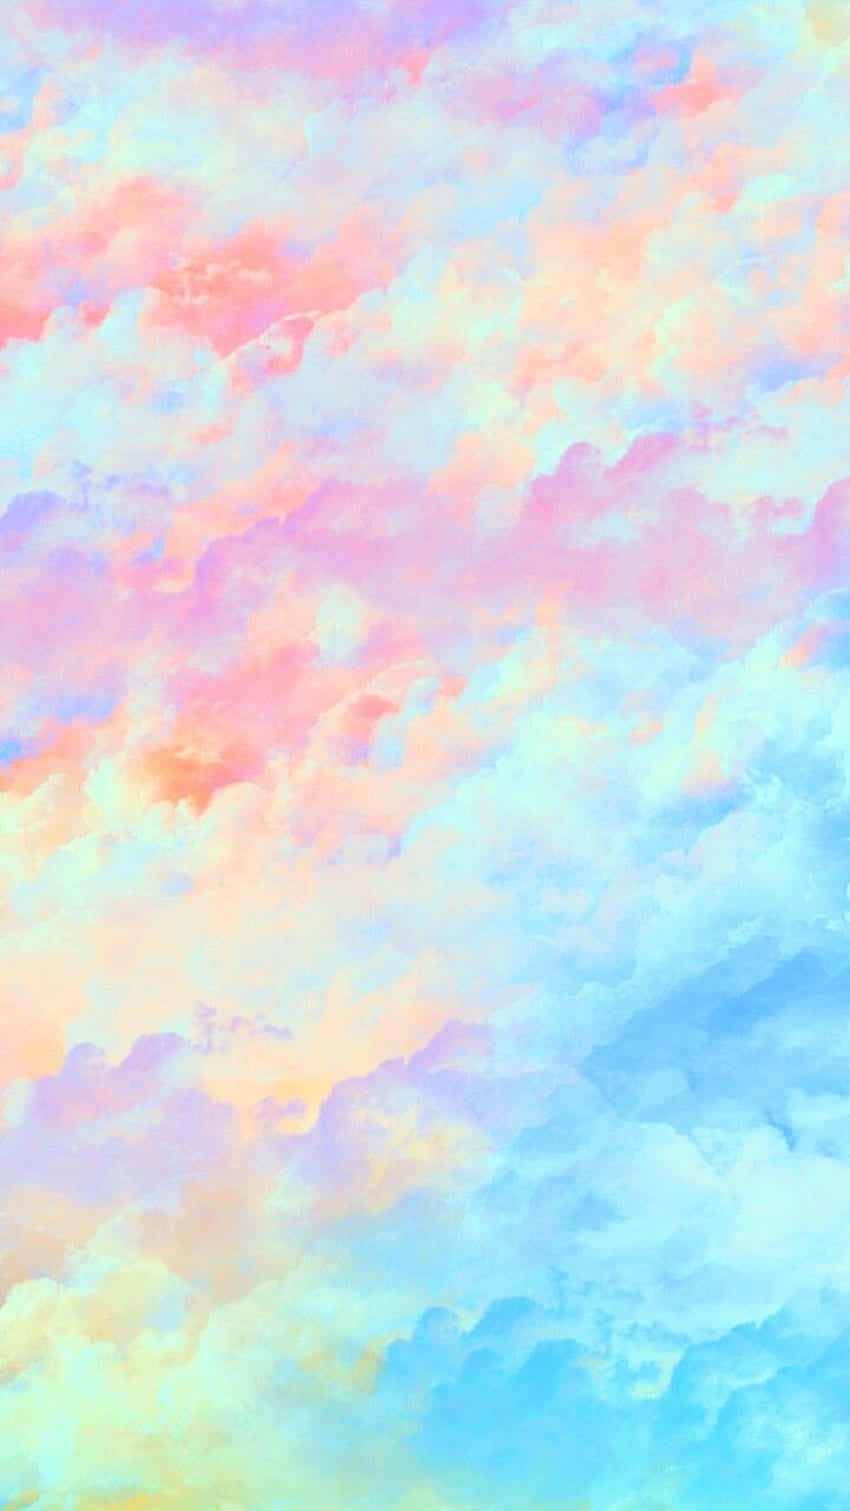 Brighten Up Your Day With This Adorable Cute Rainbow Background